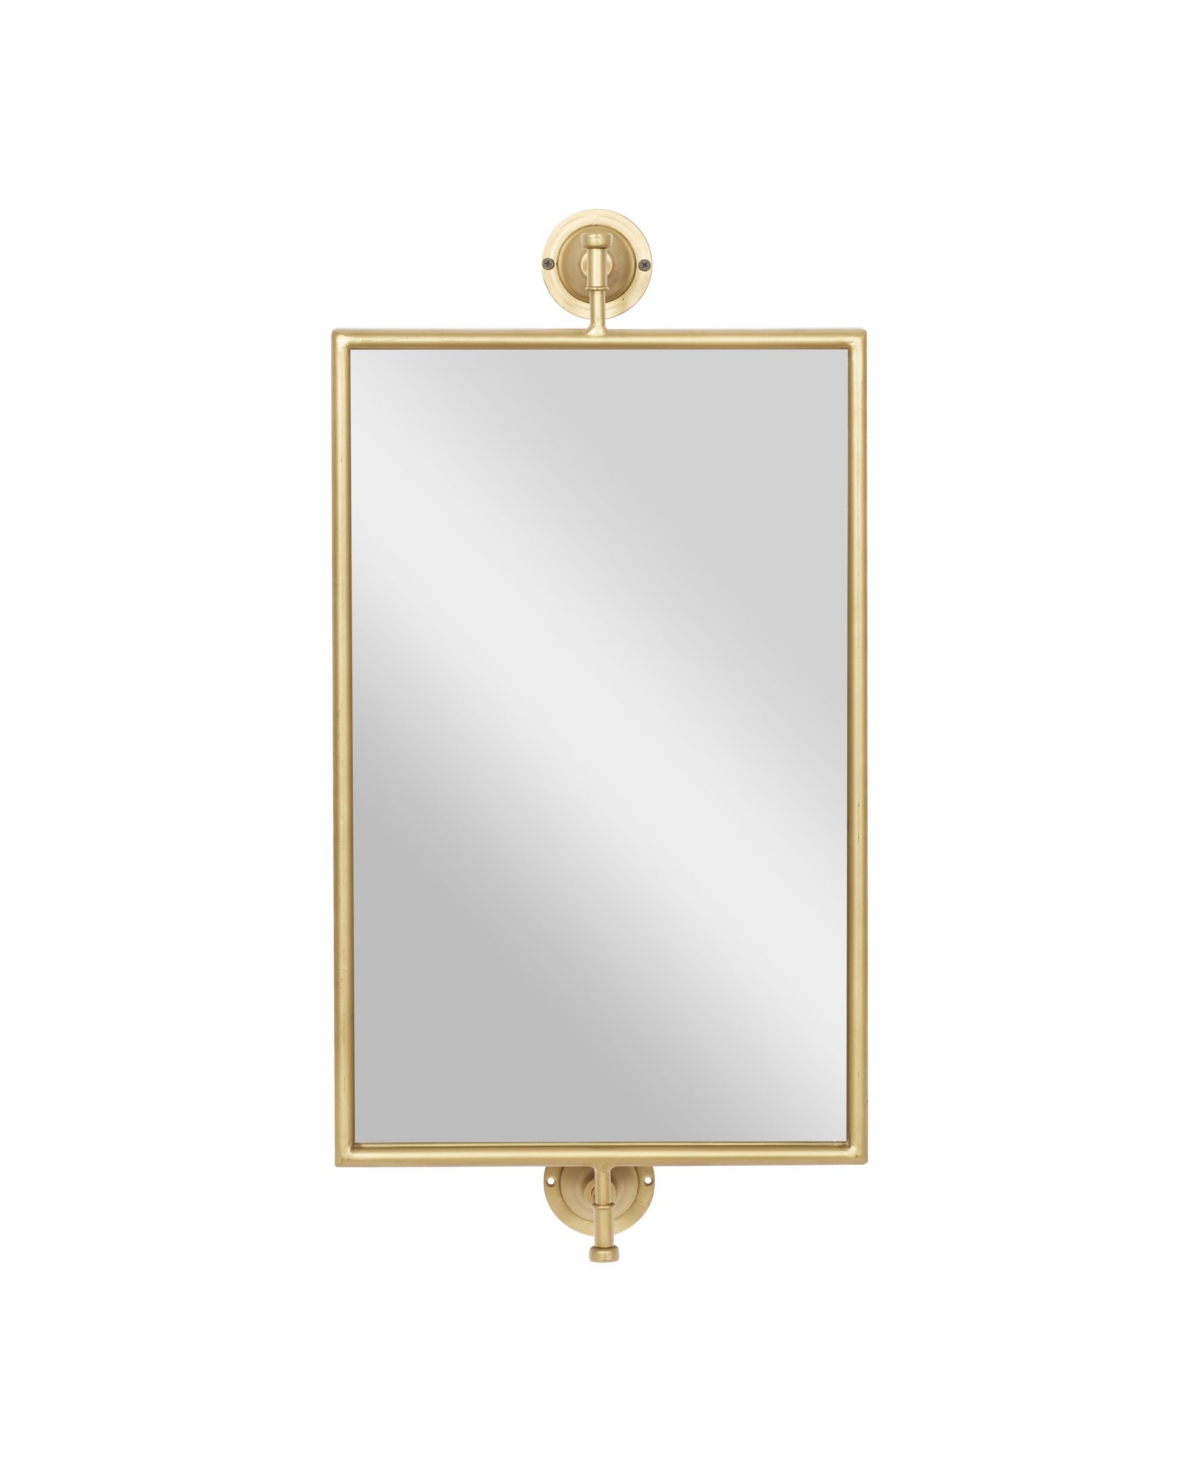 Wood Contemporary Wall Mirror, 28" x 14" - Gold-Tone